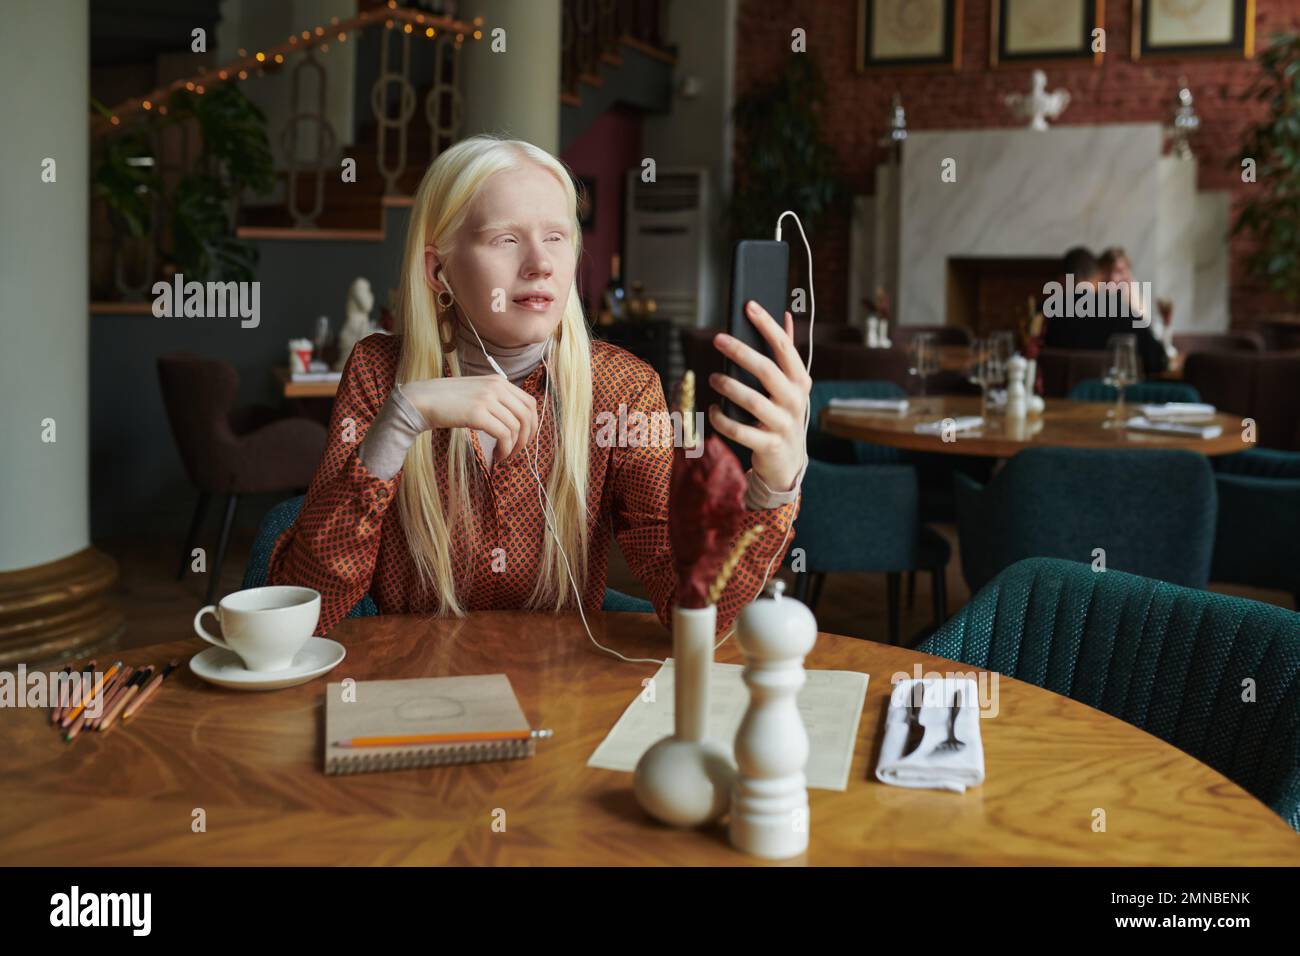 Albino girl with long hair looking at smartphone screen during communication with friend in video chat in cozy cafe Stock Photo